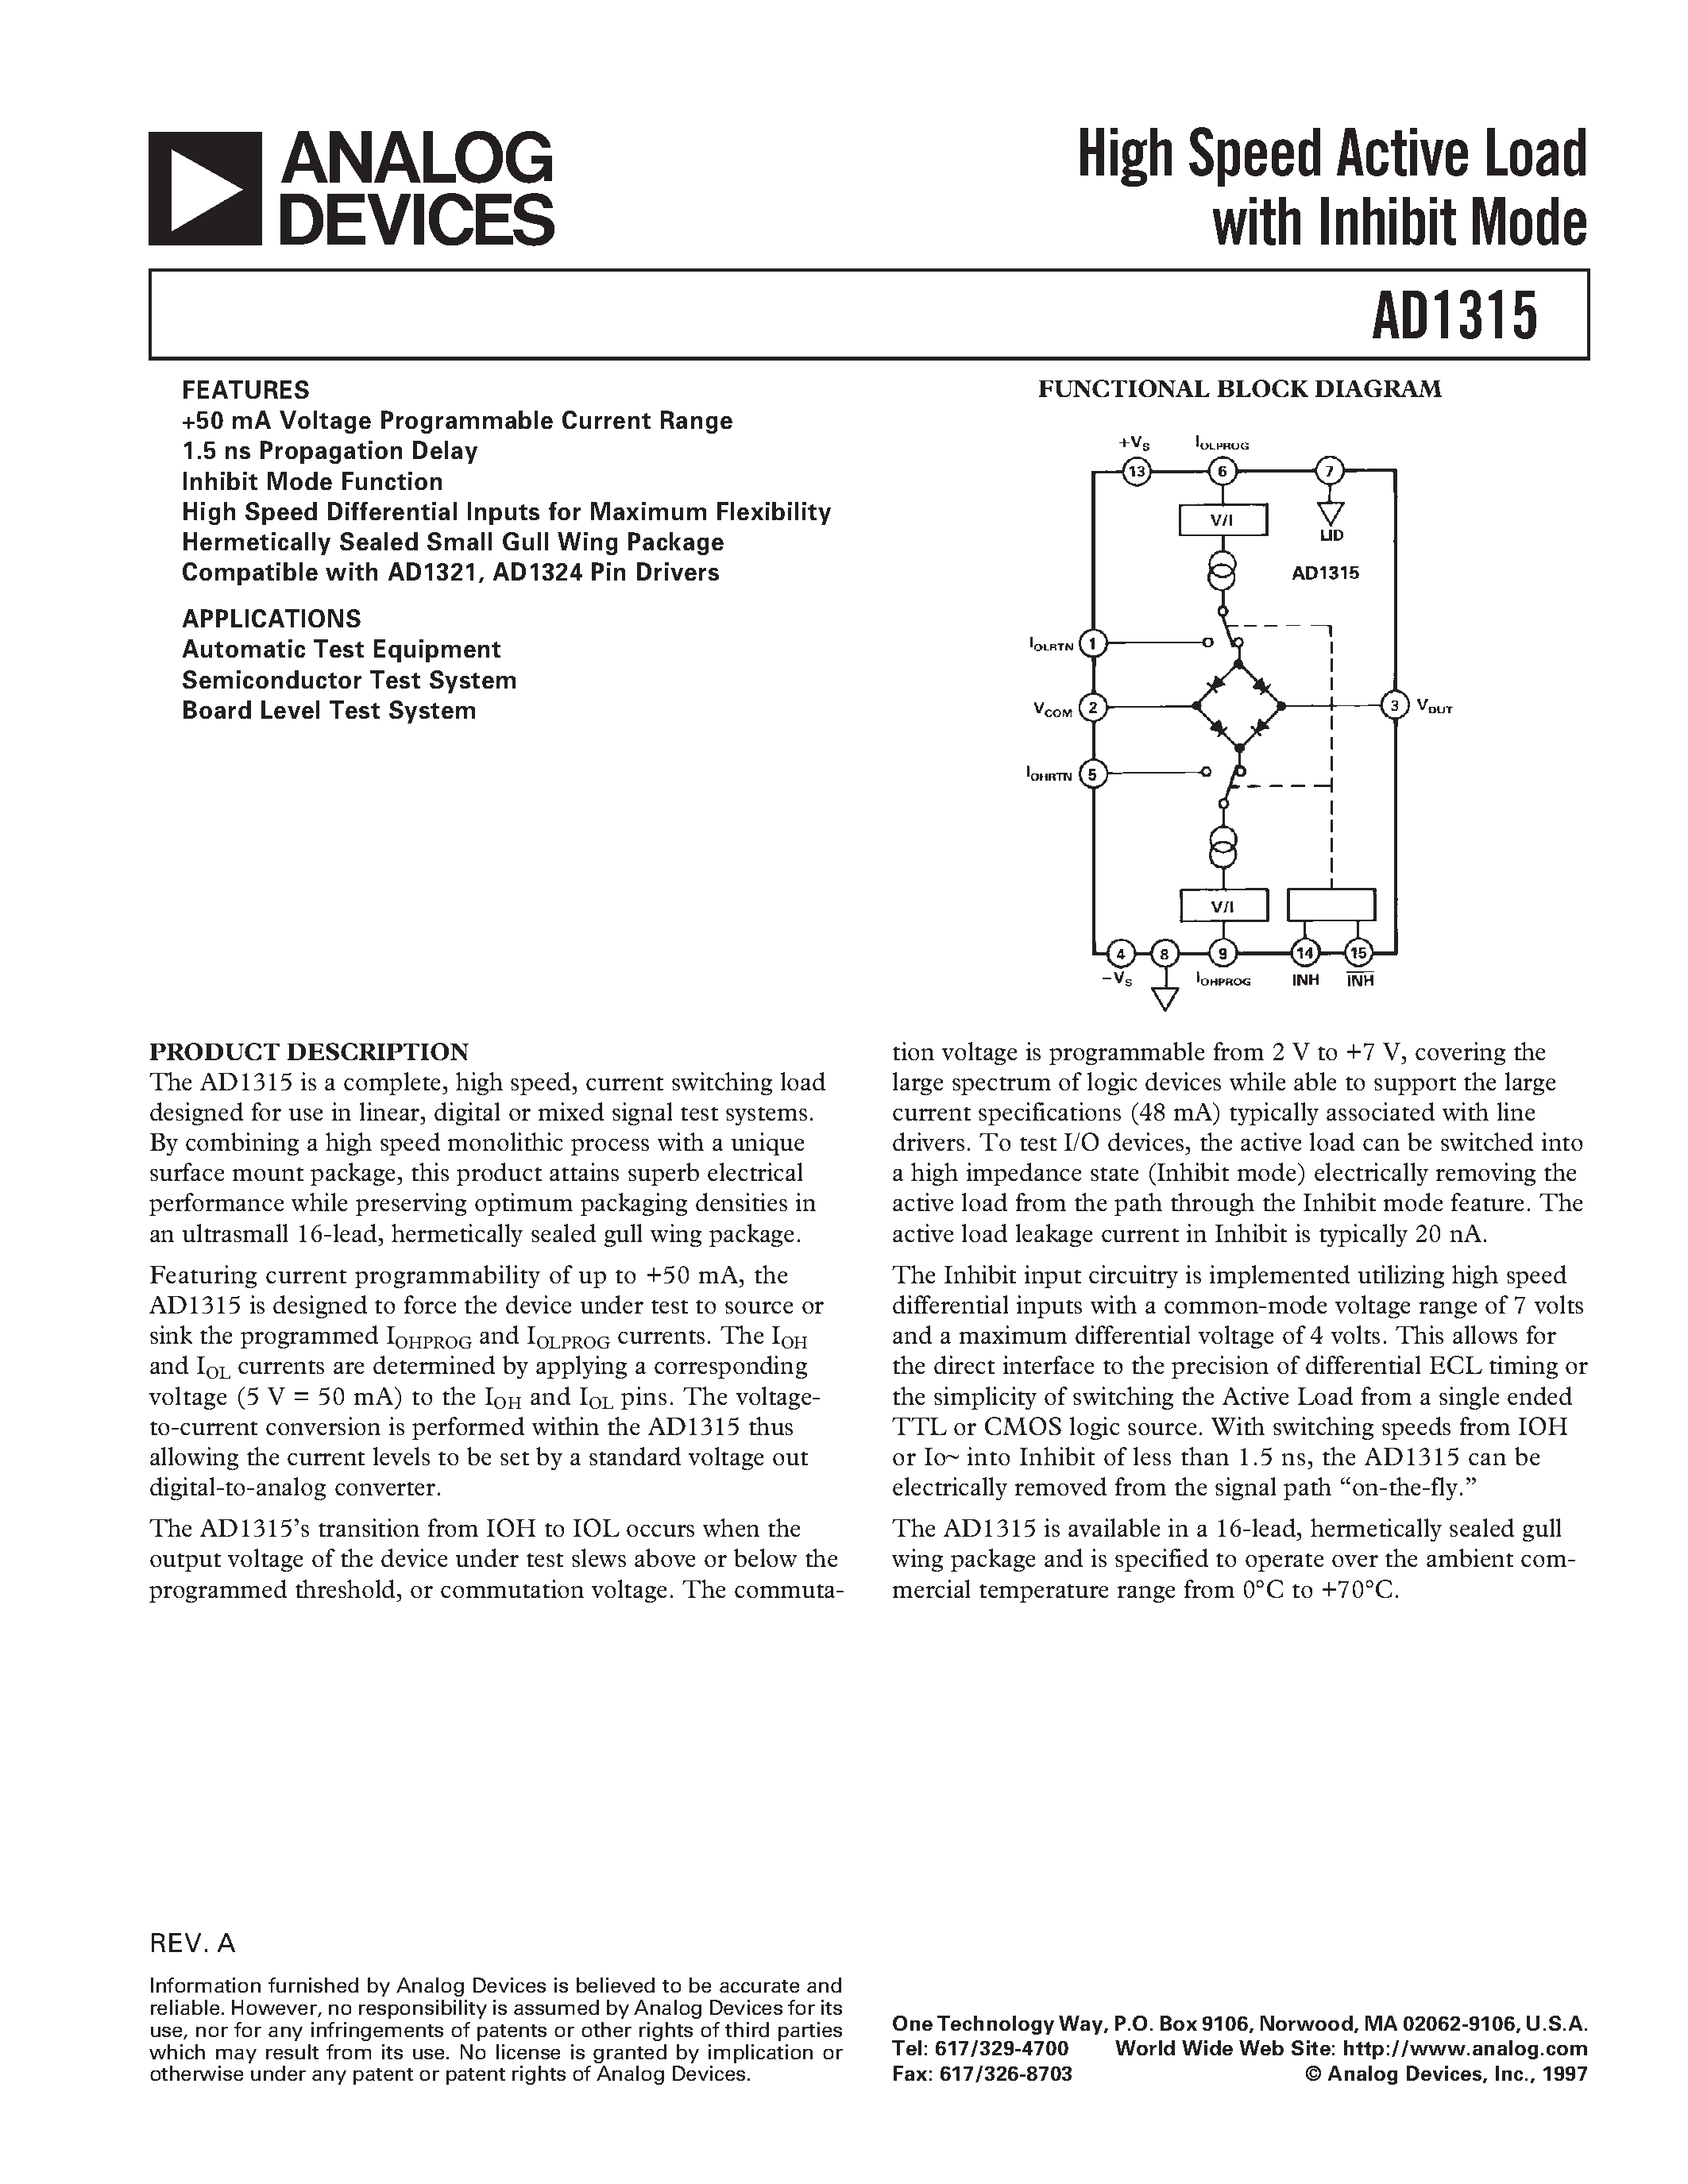 Datasheet AD1315 - High Speed Active Load with Inhibit Mode page 1